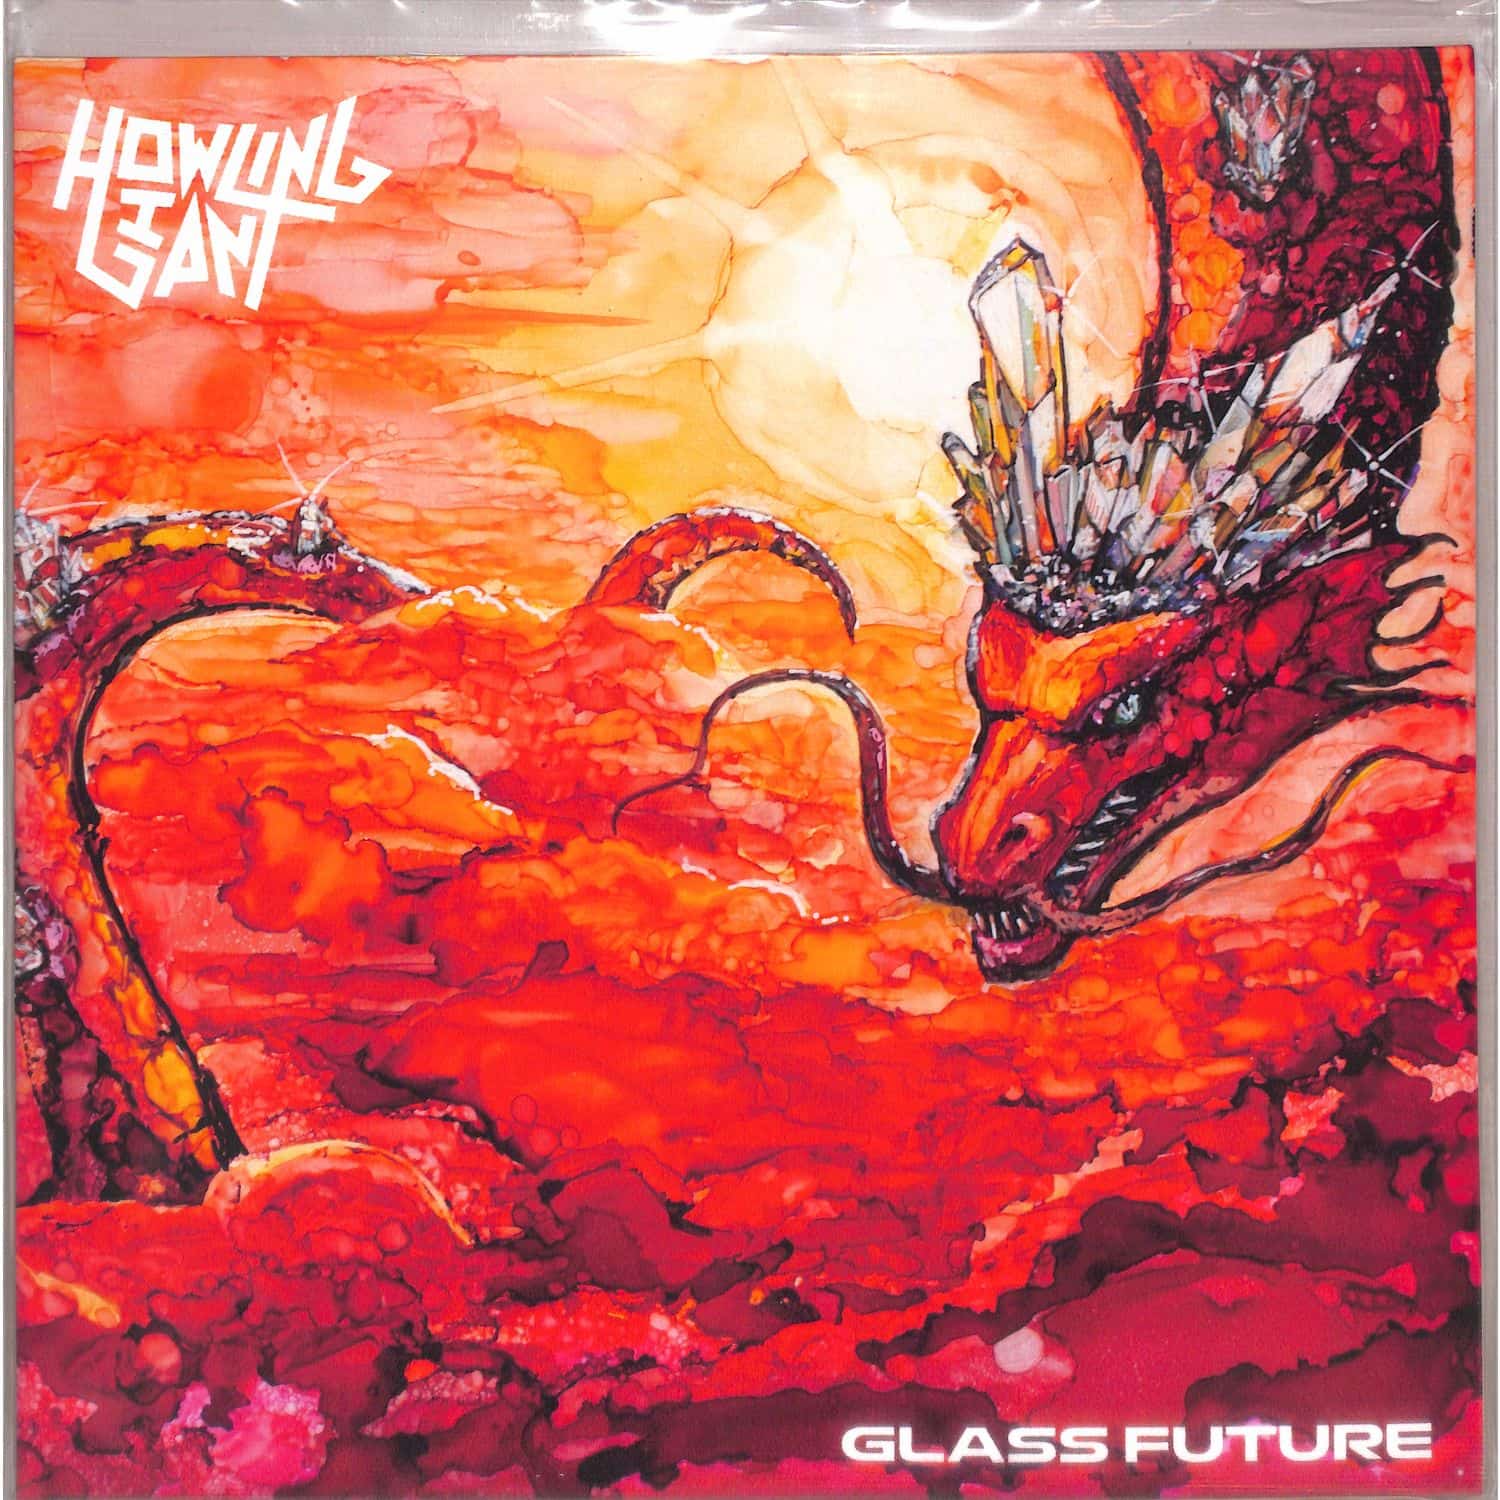 Howling Giant - GLASS FUTURE 